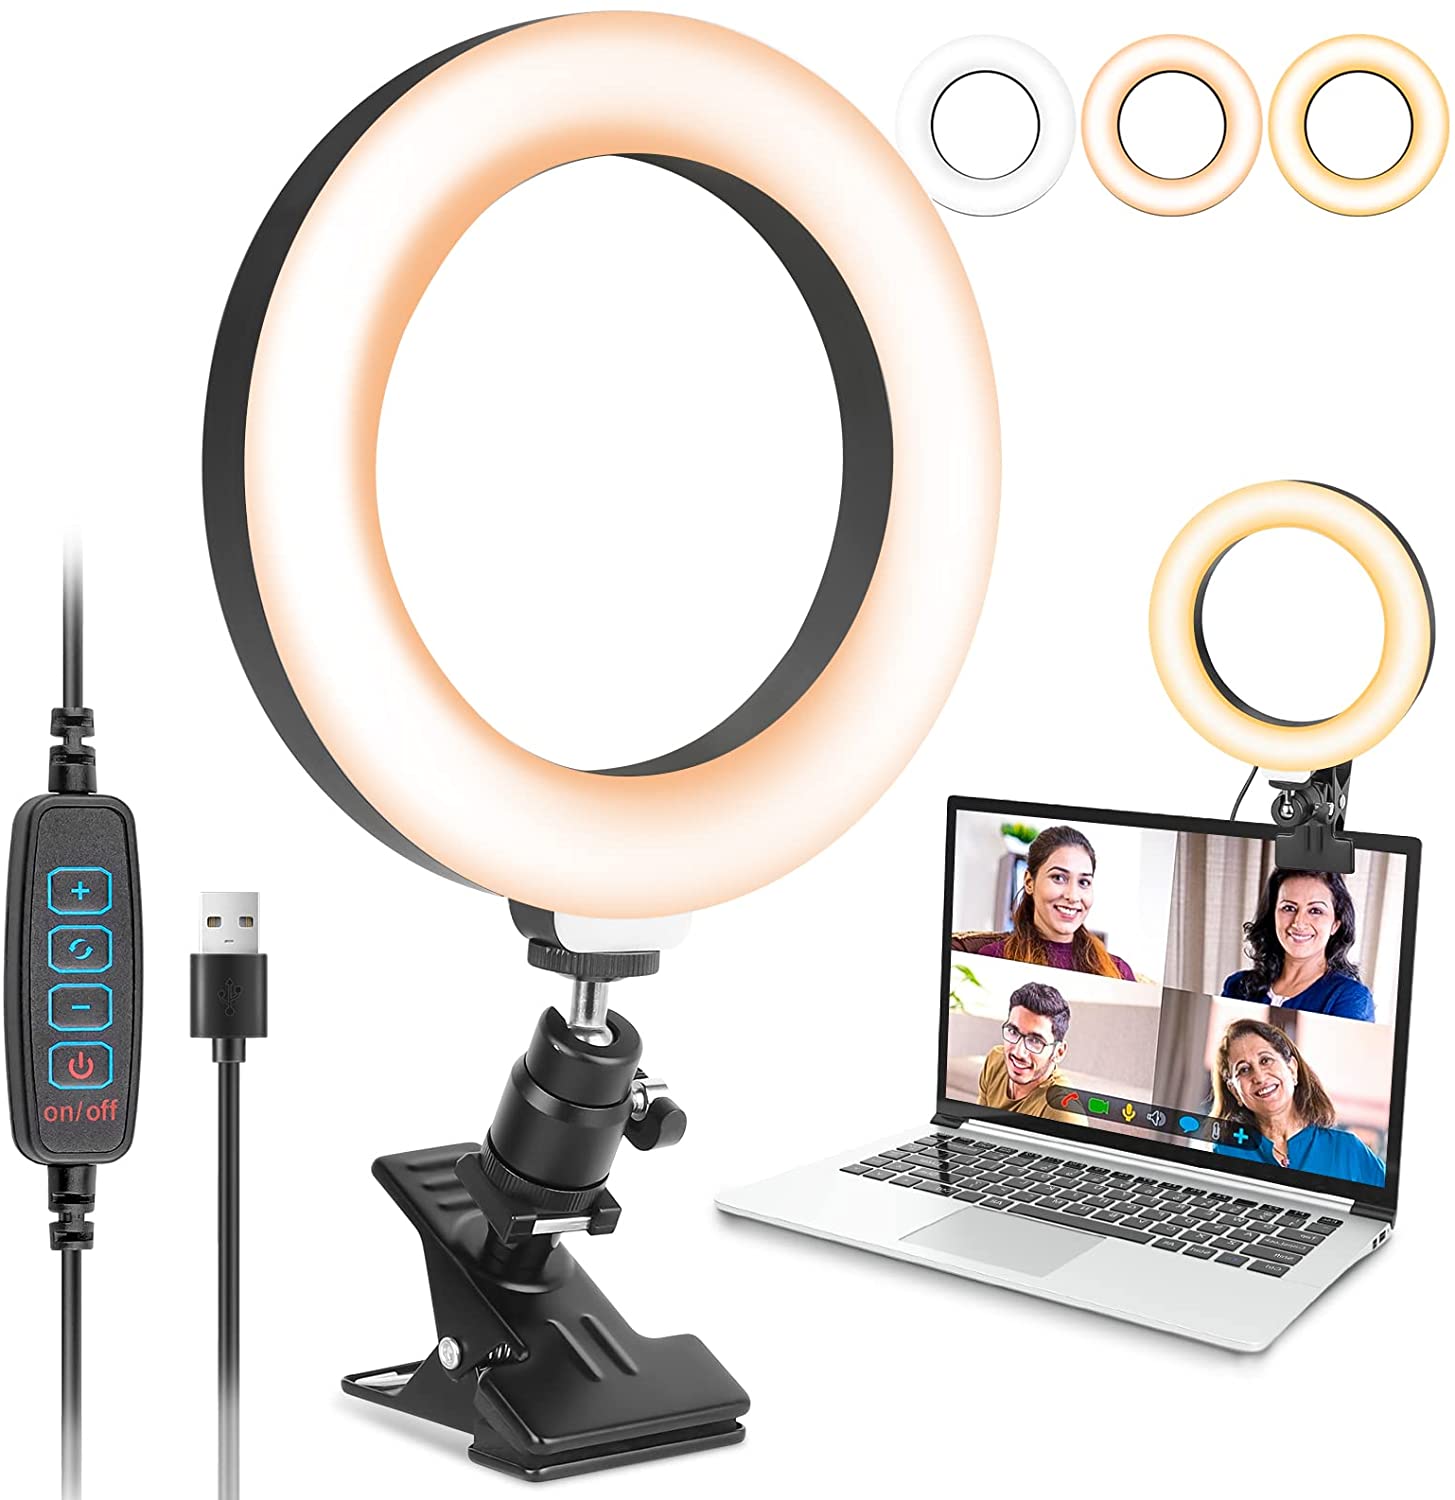 Video Conference Lighting, Aureday 6” Led Selfie Ring Light for Video Conference, Zoom Calls, Live Streaming, Photography, Online Teaching, Dimmable Webcam/Computer/Laptop/Desktop Light